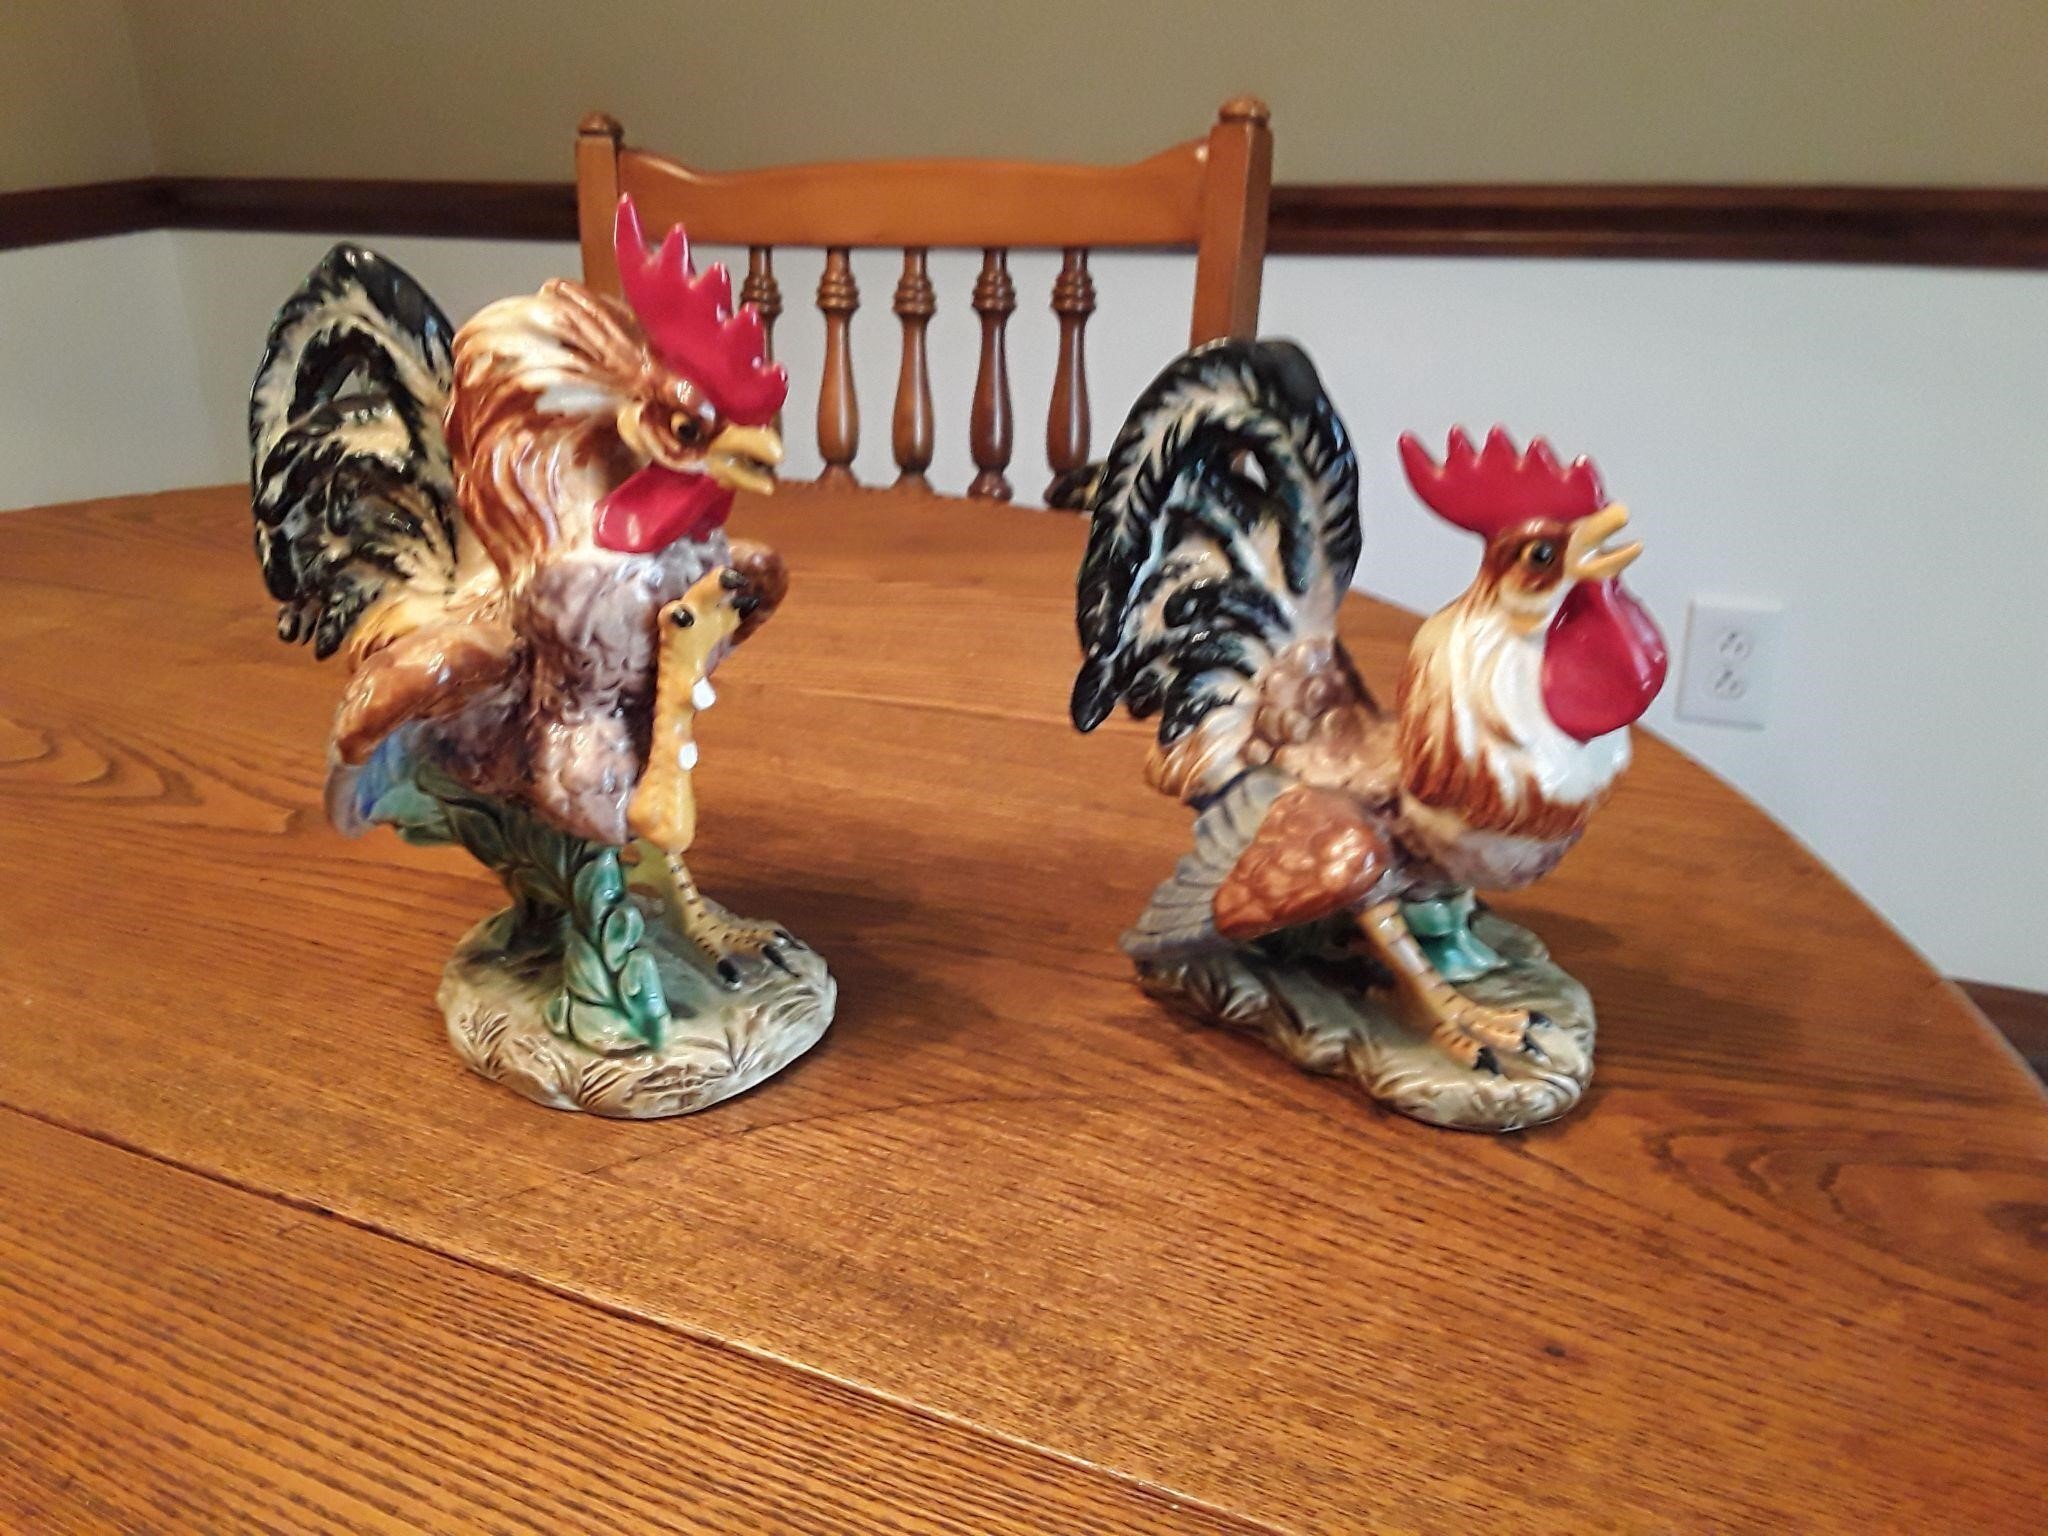 2 Ceramic Roosters